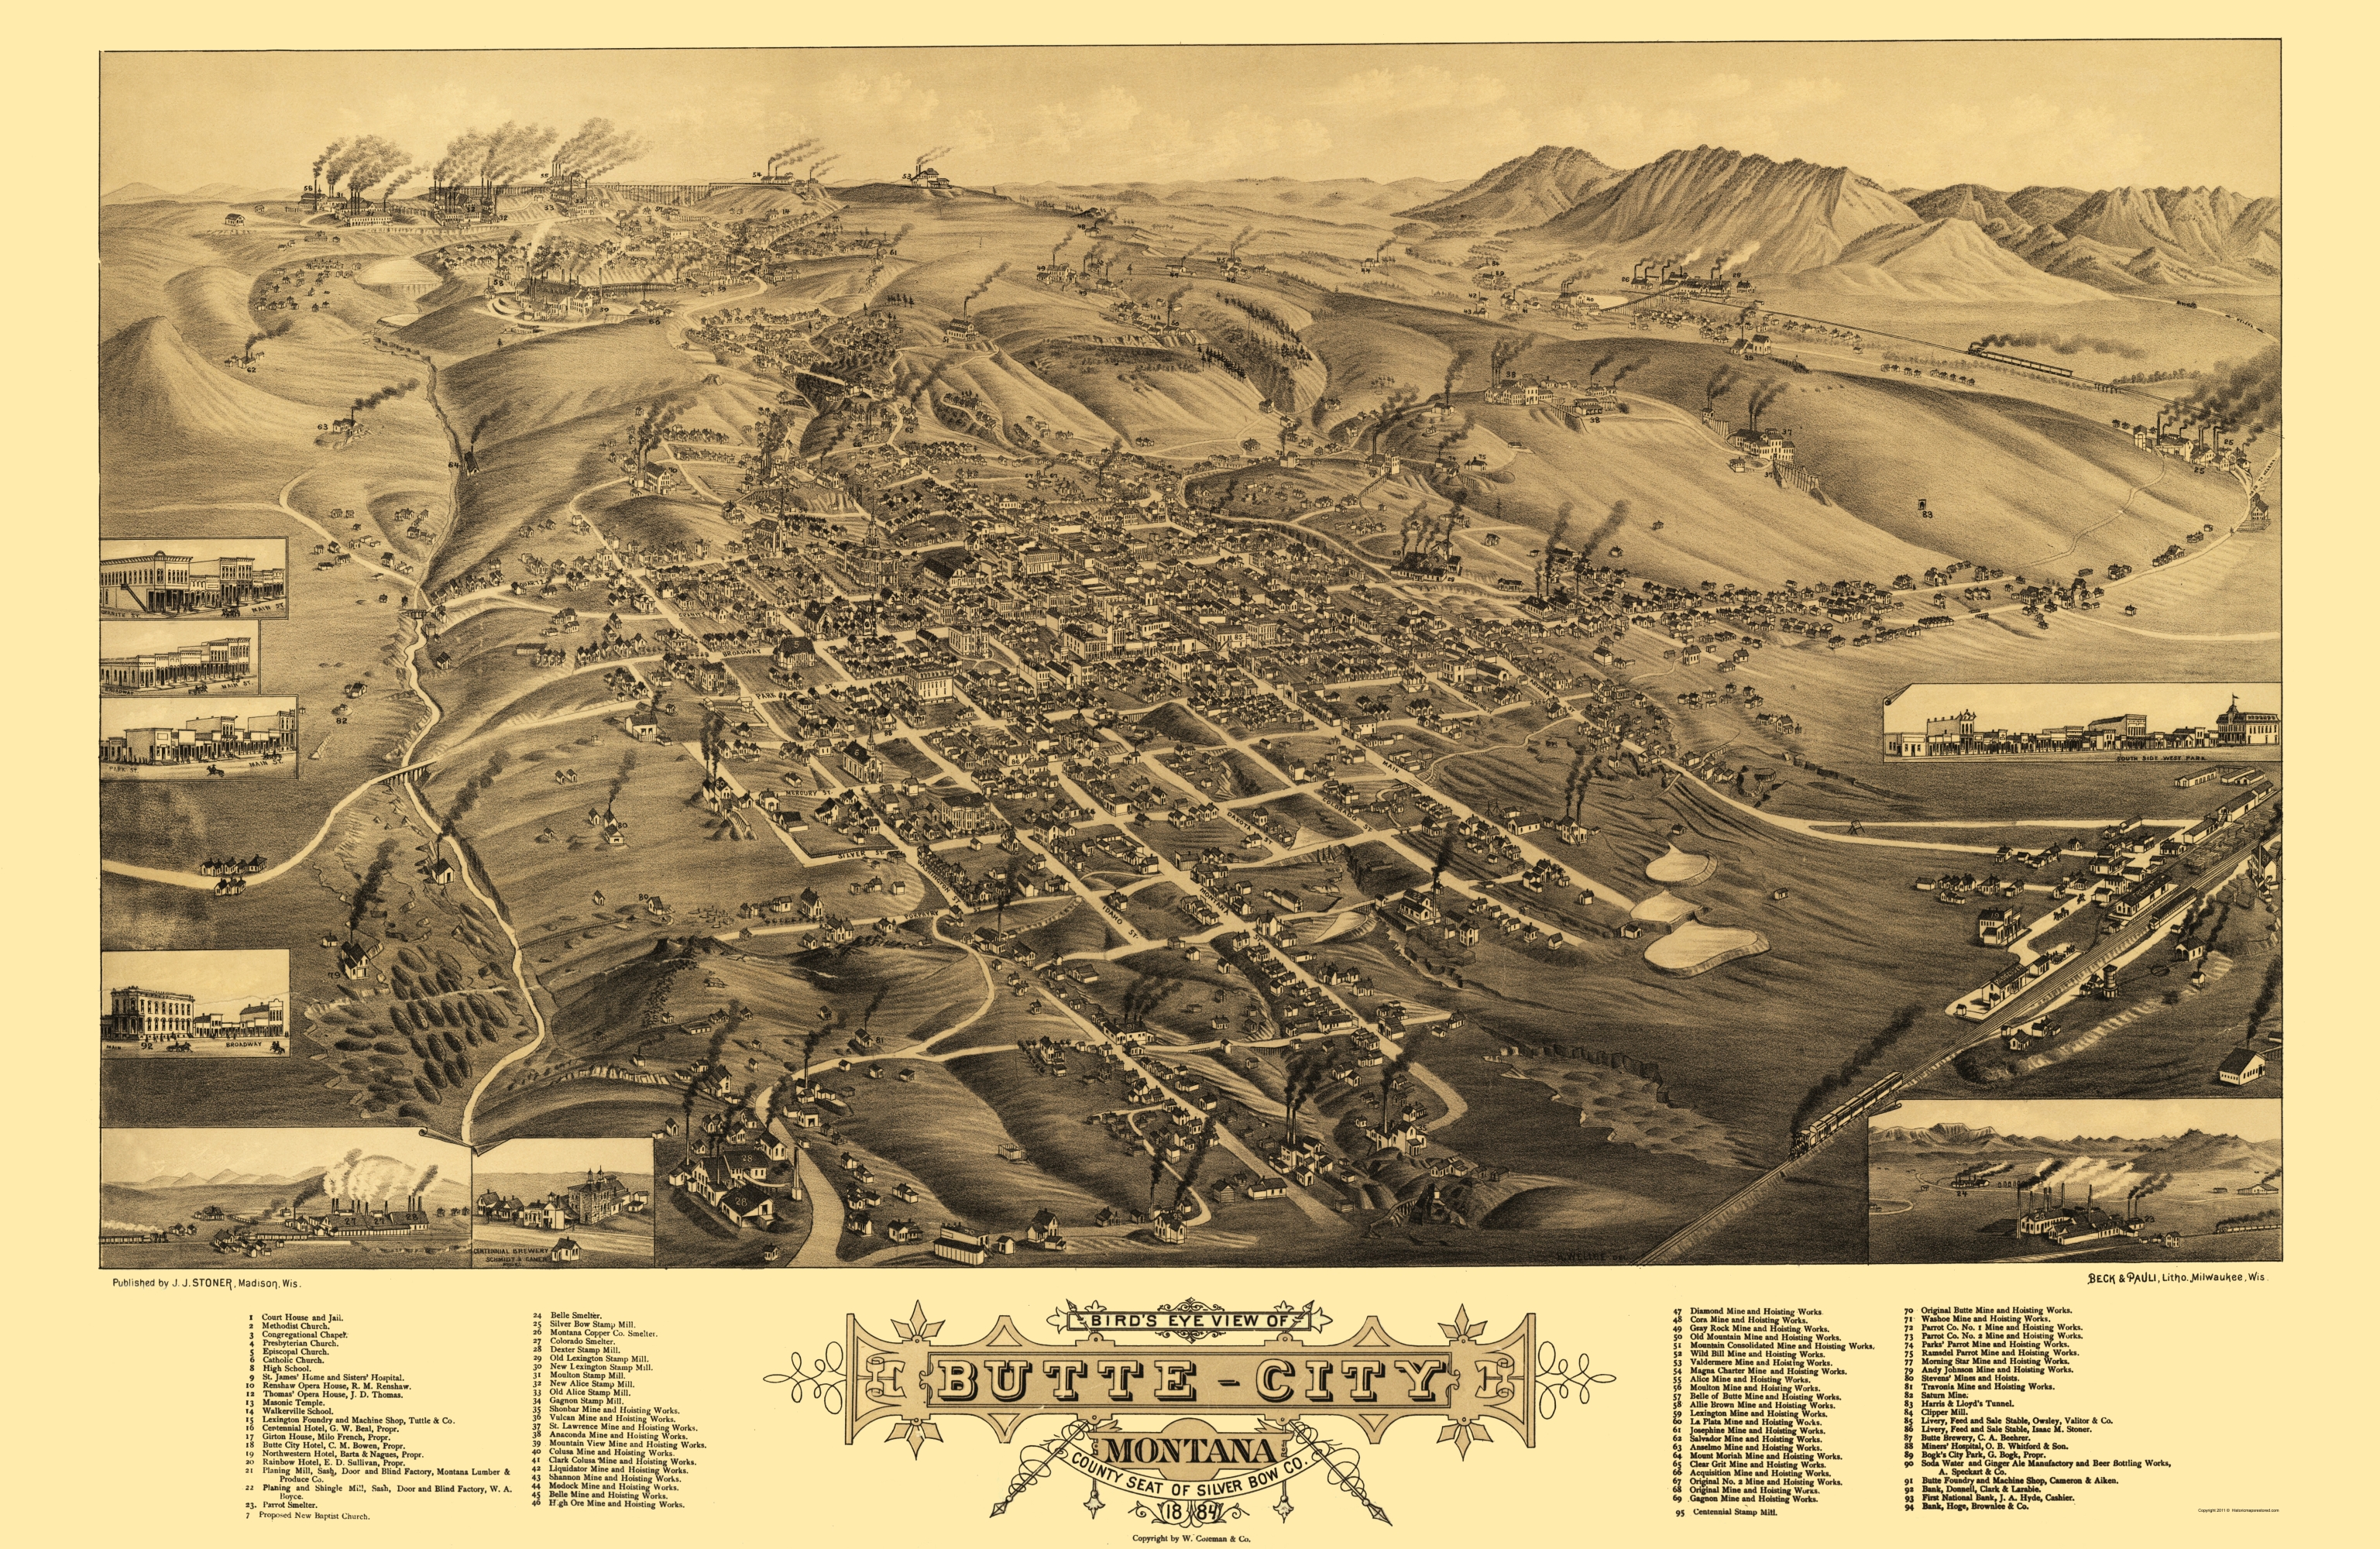 Panoramic Print - Butte Montana - Stoner 1884 - This is an exquisite full-c...